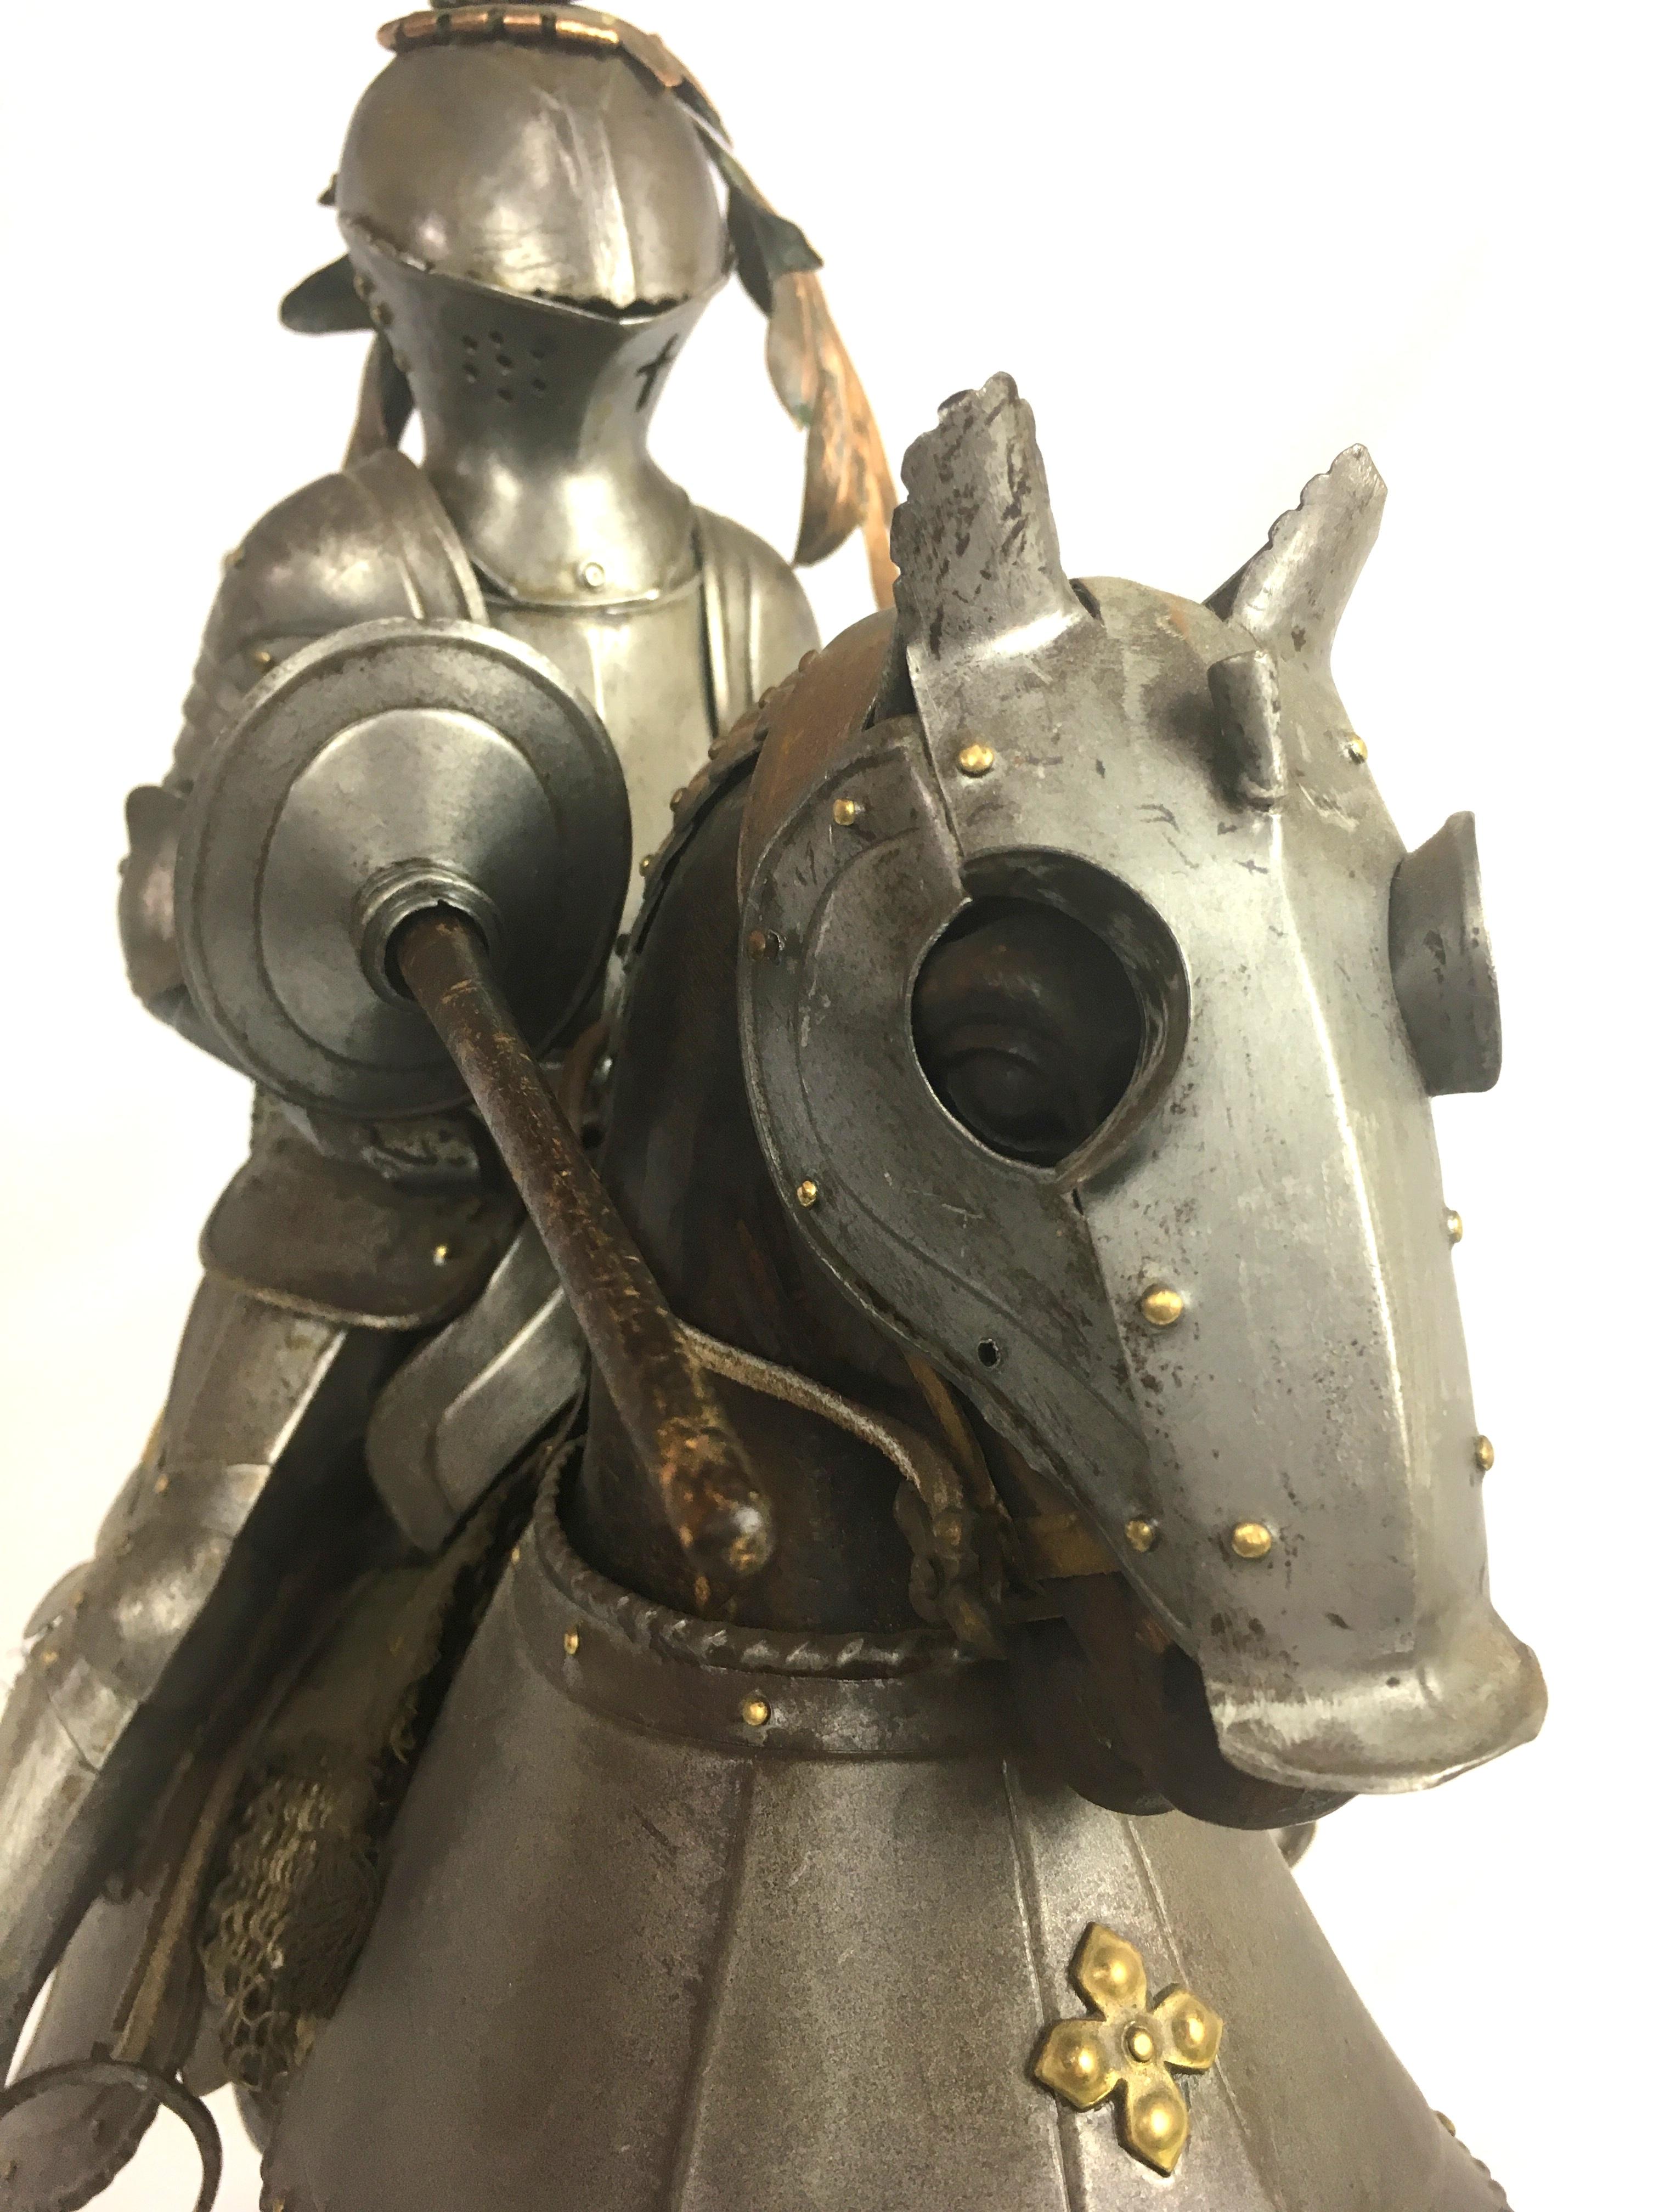 Carved 19th Century Metal and Wooden Model of 15th Century Armored Knight on Horseback For Sale